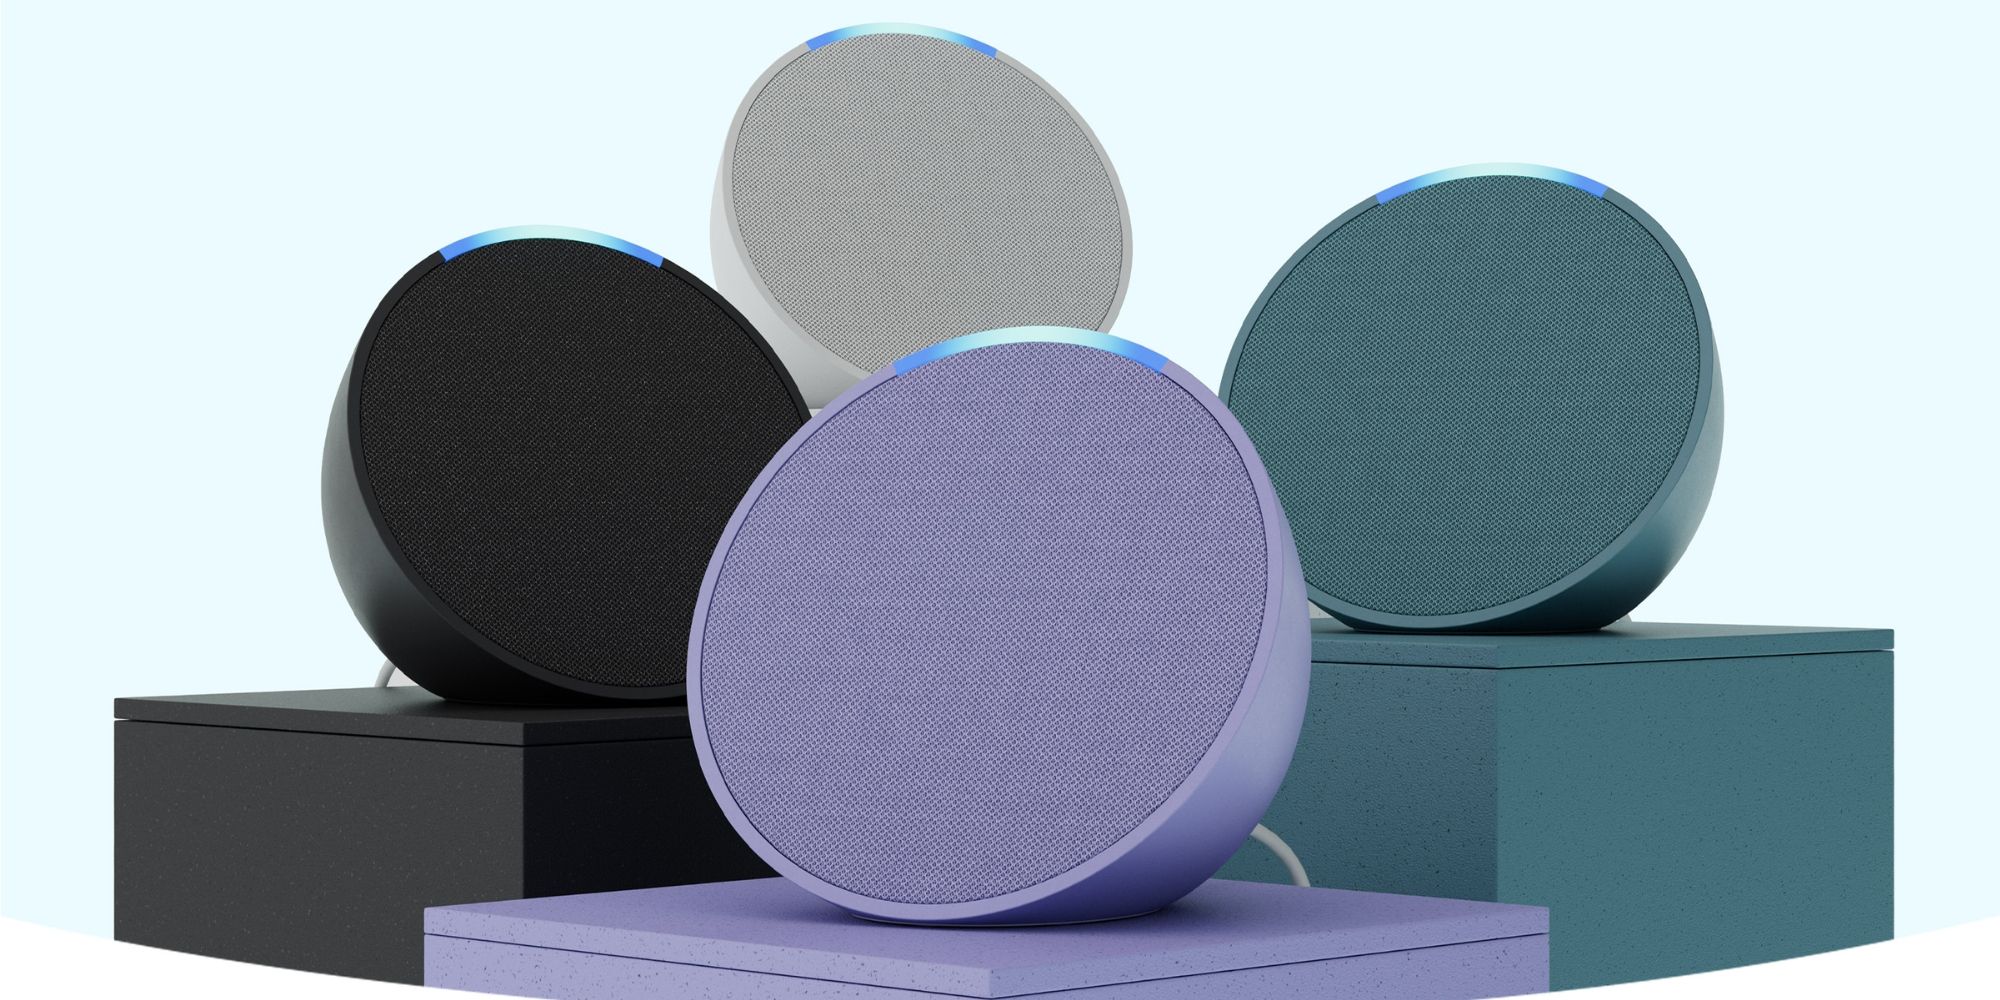 The Amazon Echo Pop in four different colors